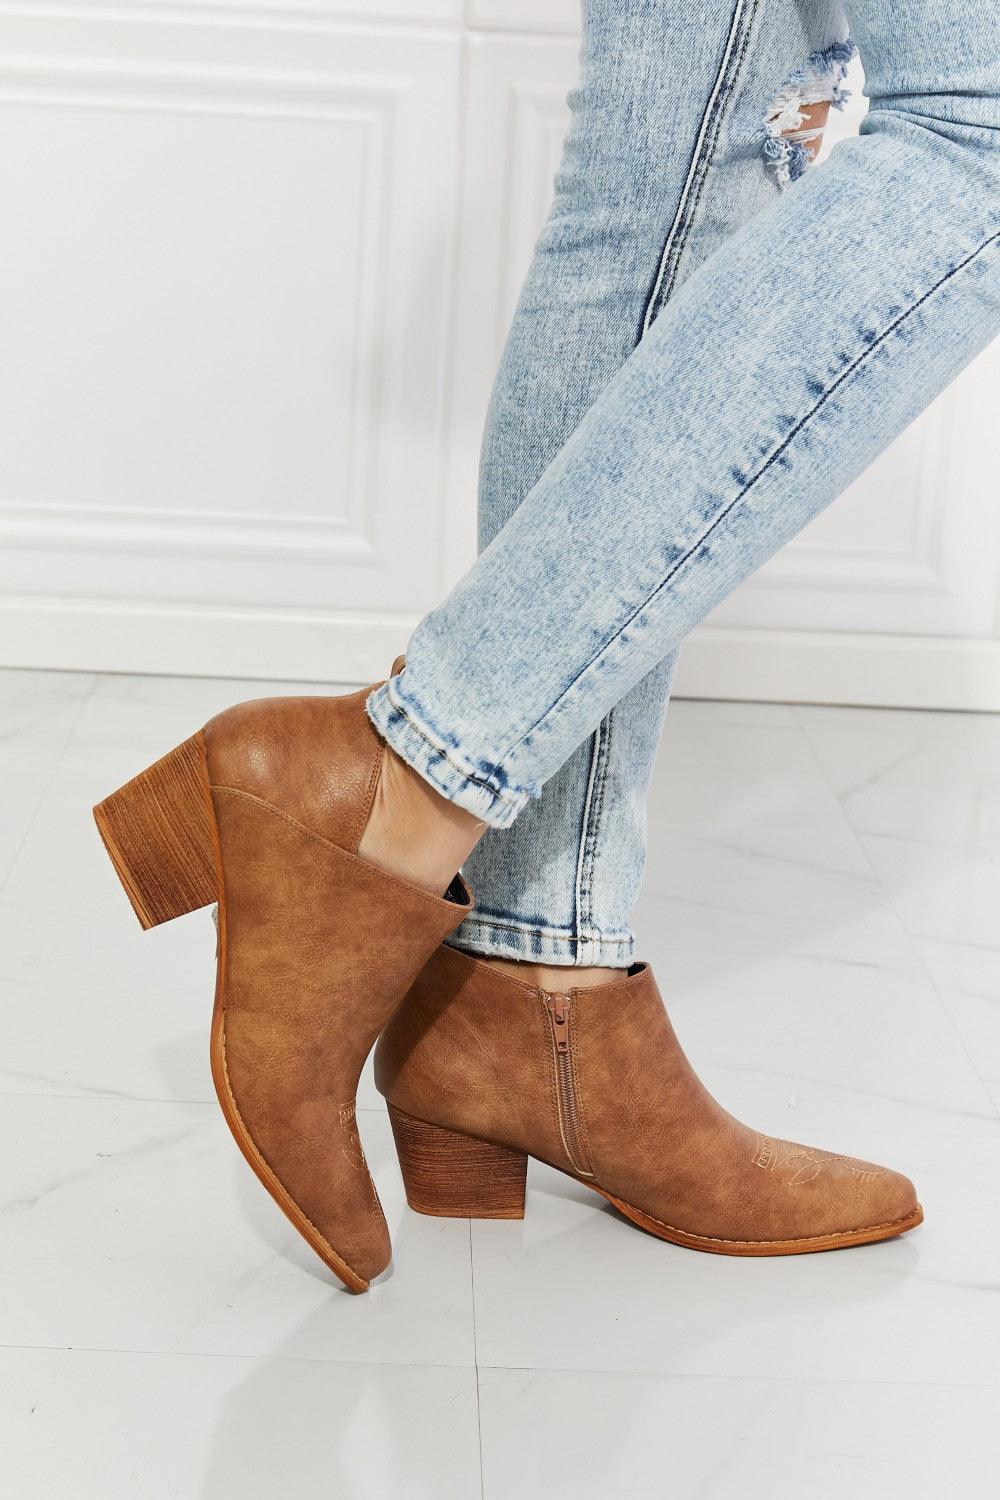 Trust Yourself Embroidered Crossover Cowboy Bootie in Caramel - Studio 653